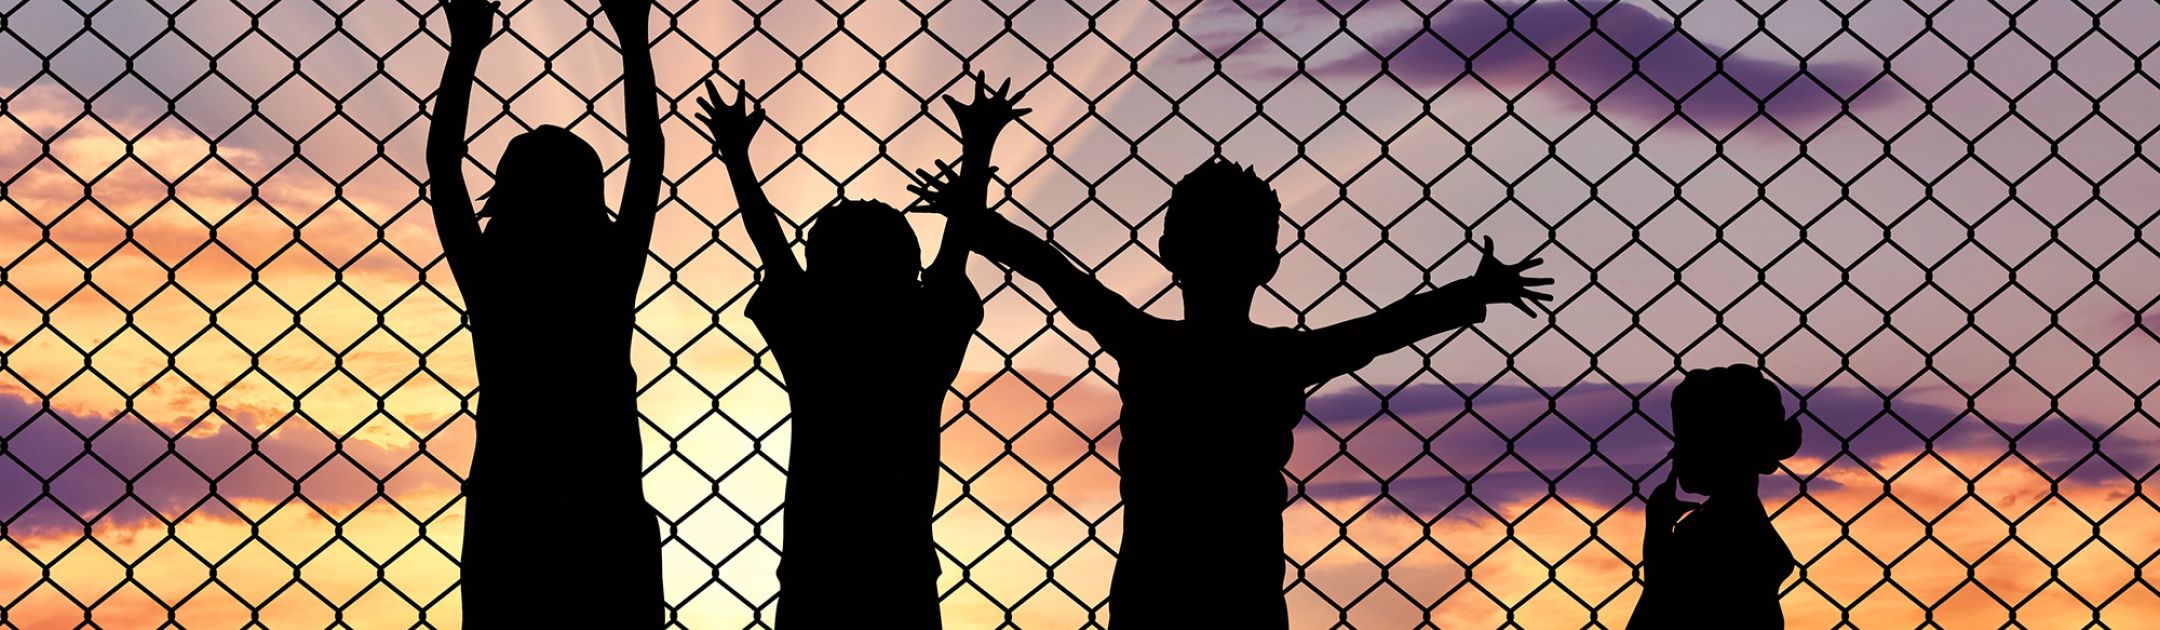 Image of children at a border fence